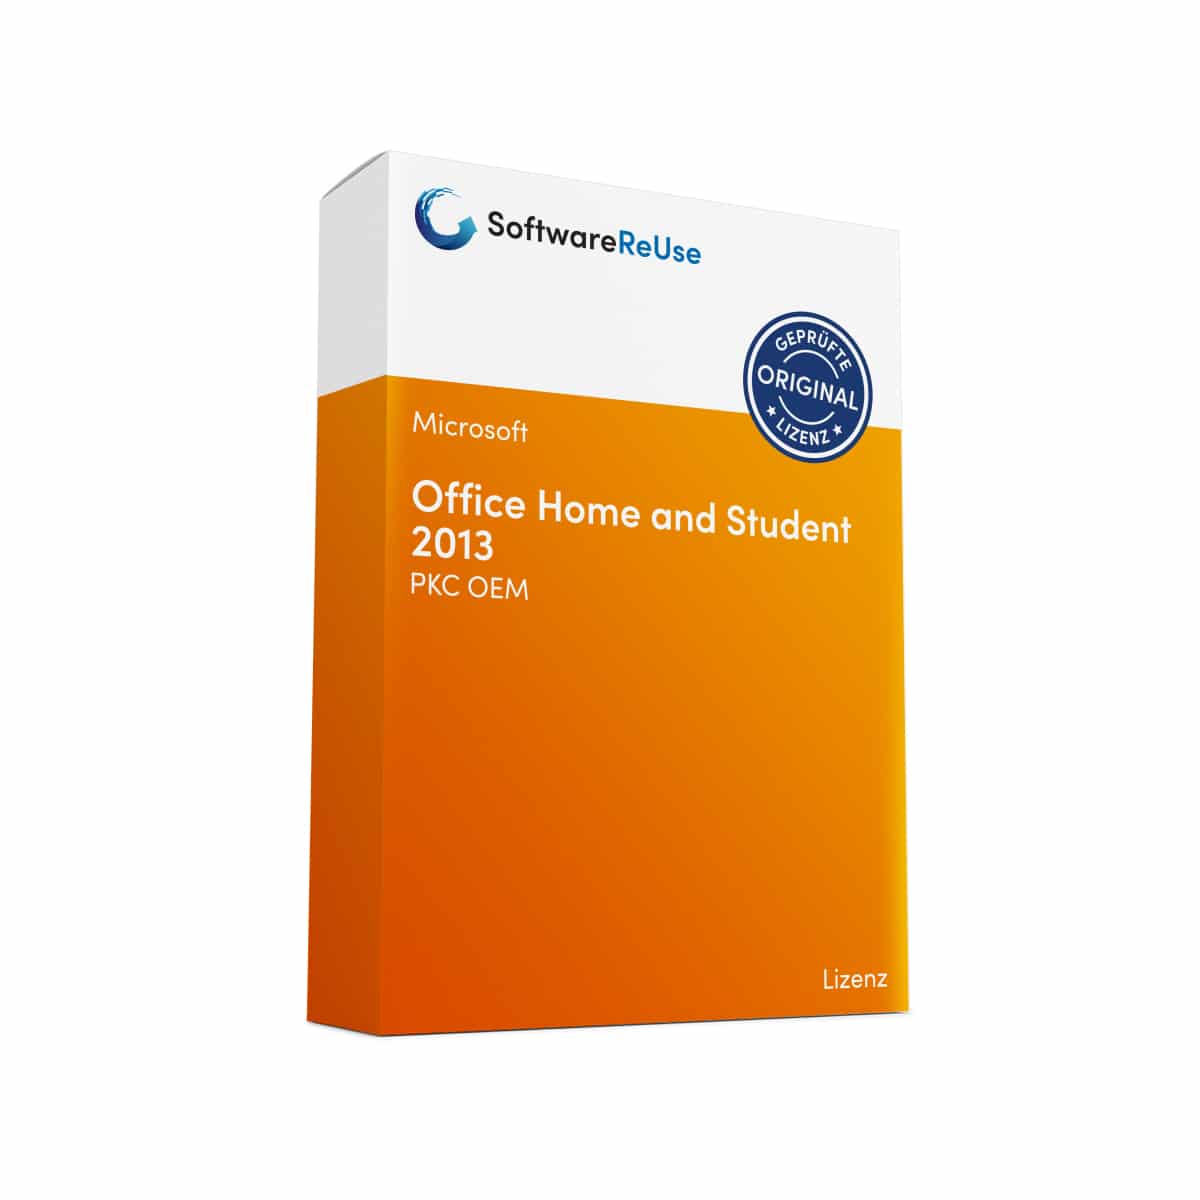 Office Home and Student 2013 PKC OEM – DE